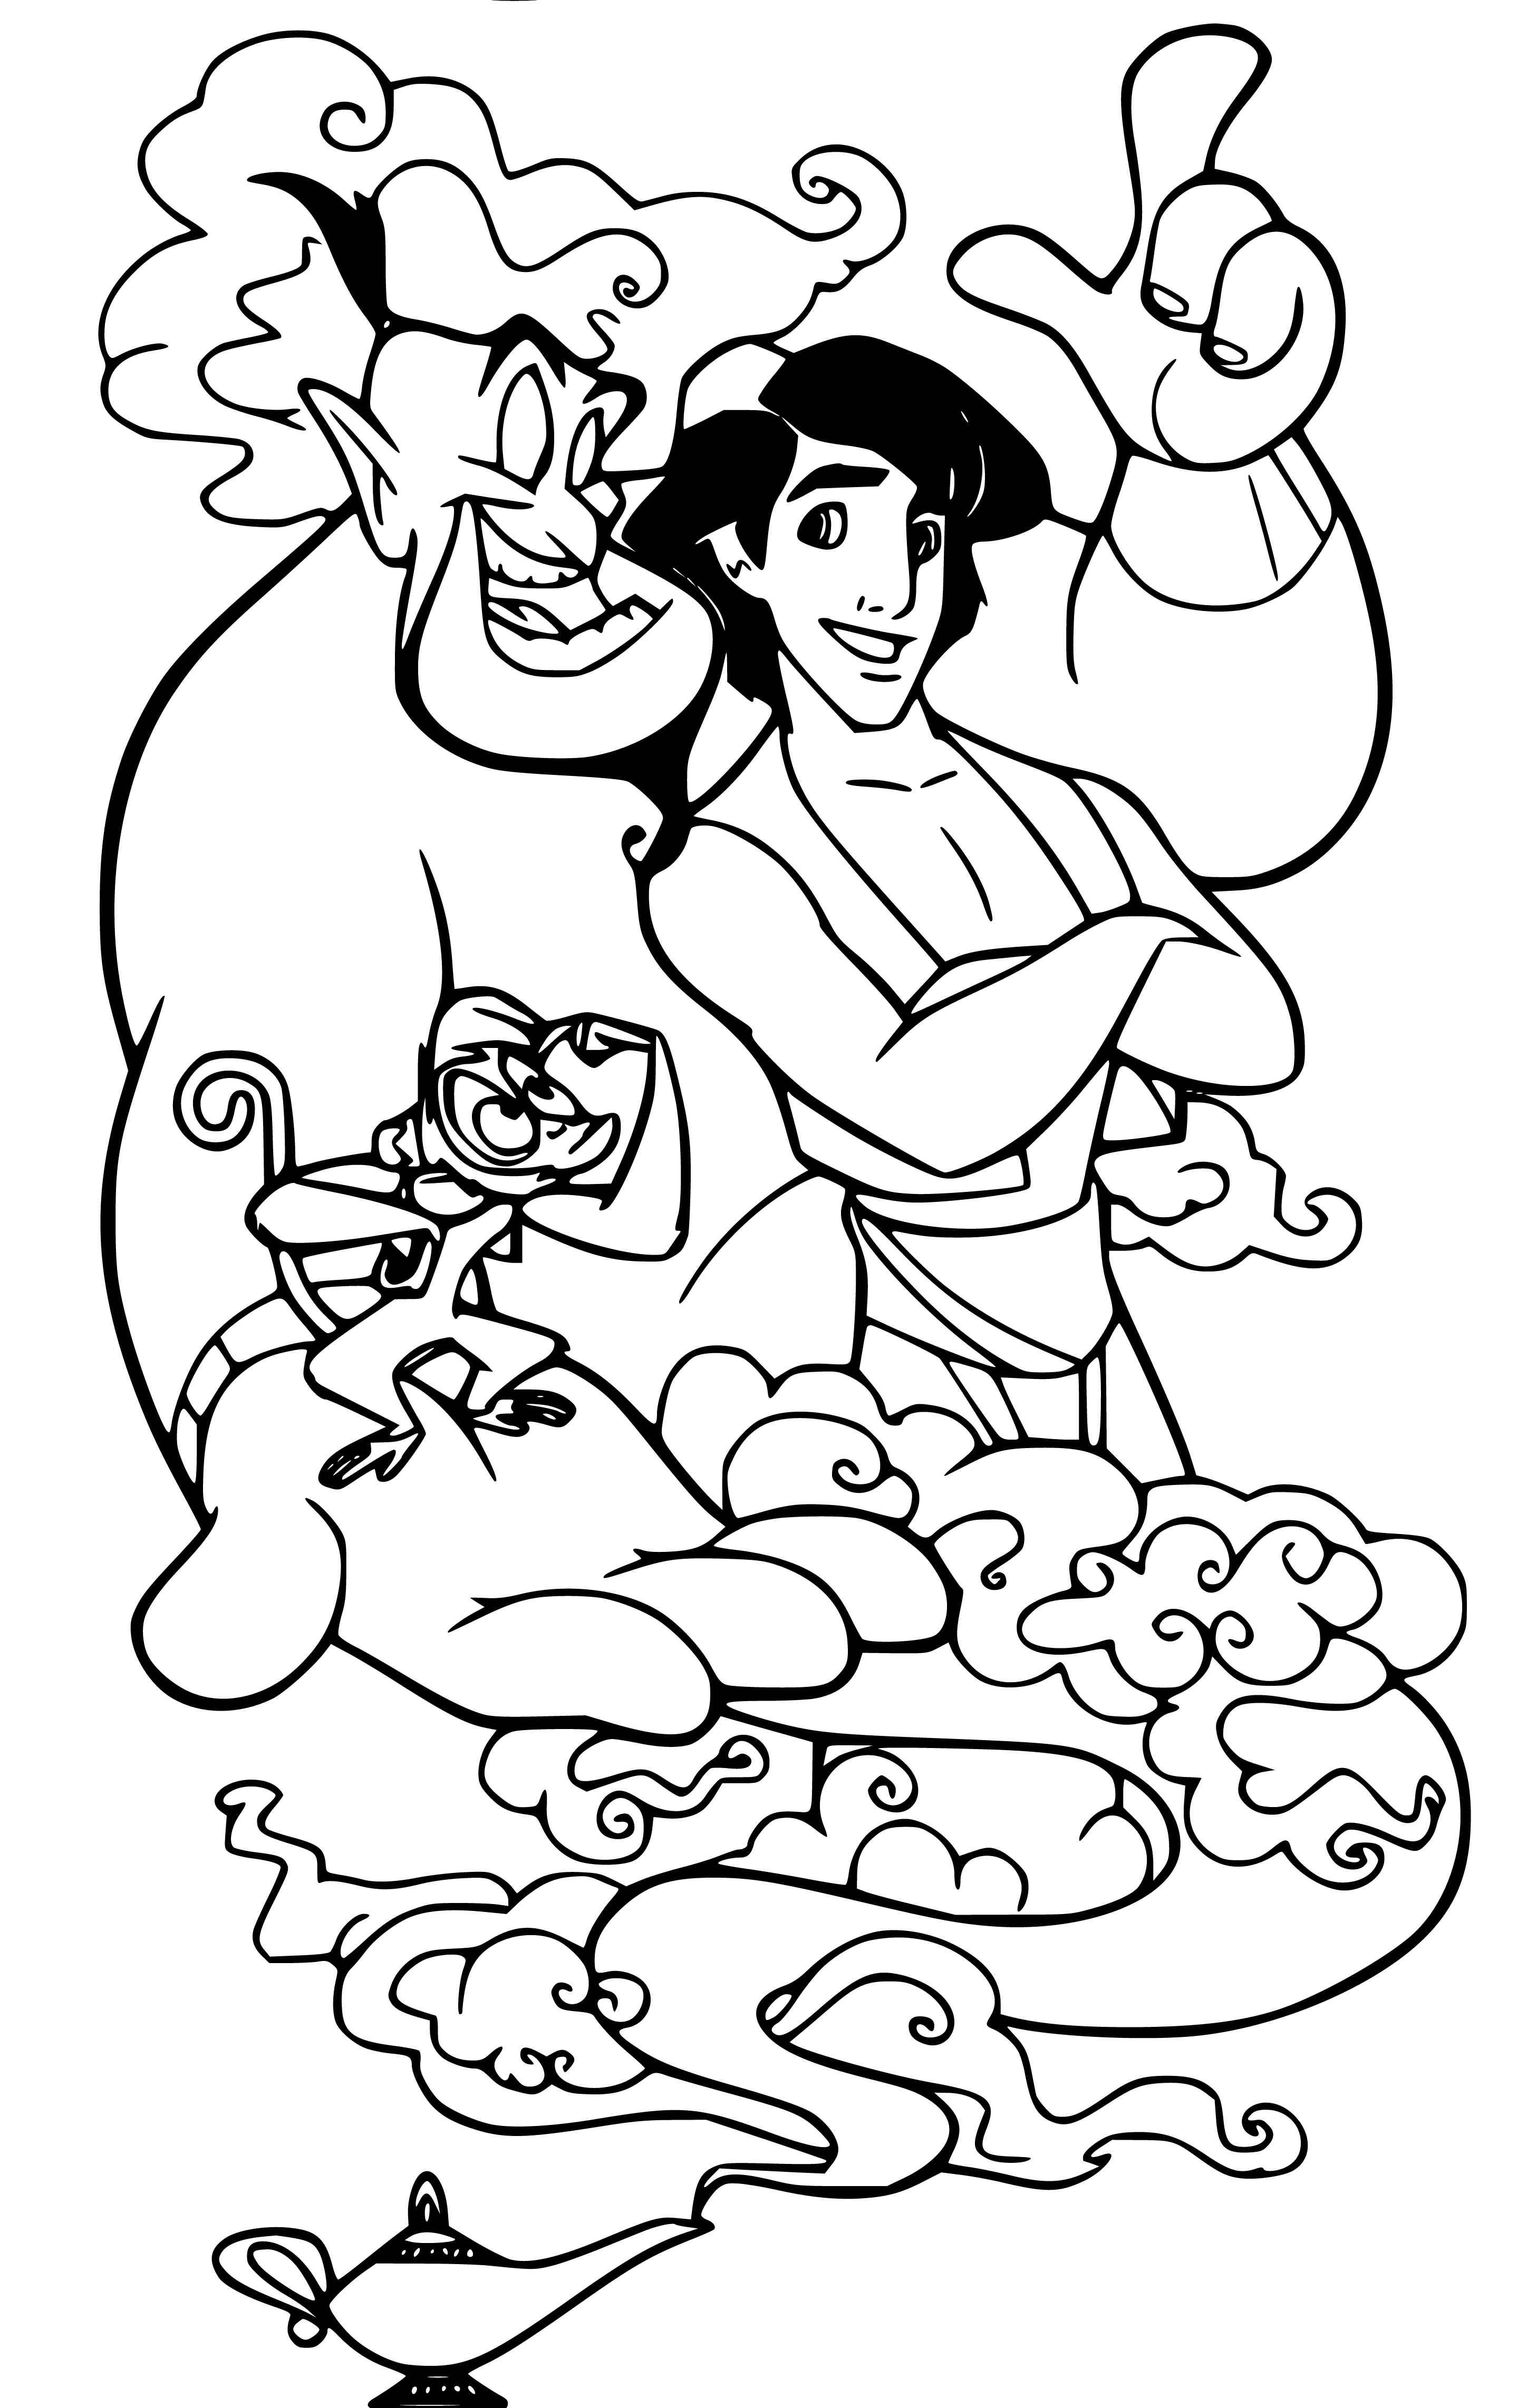 Genie and Aladdin Coloring Page for Kids - SheetalColor.com